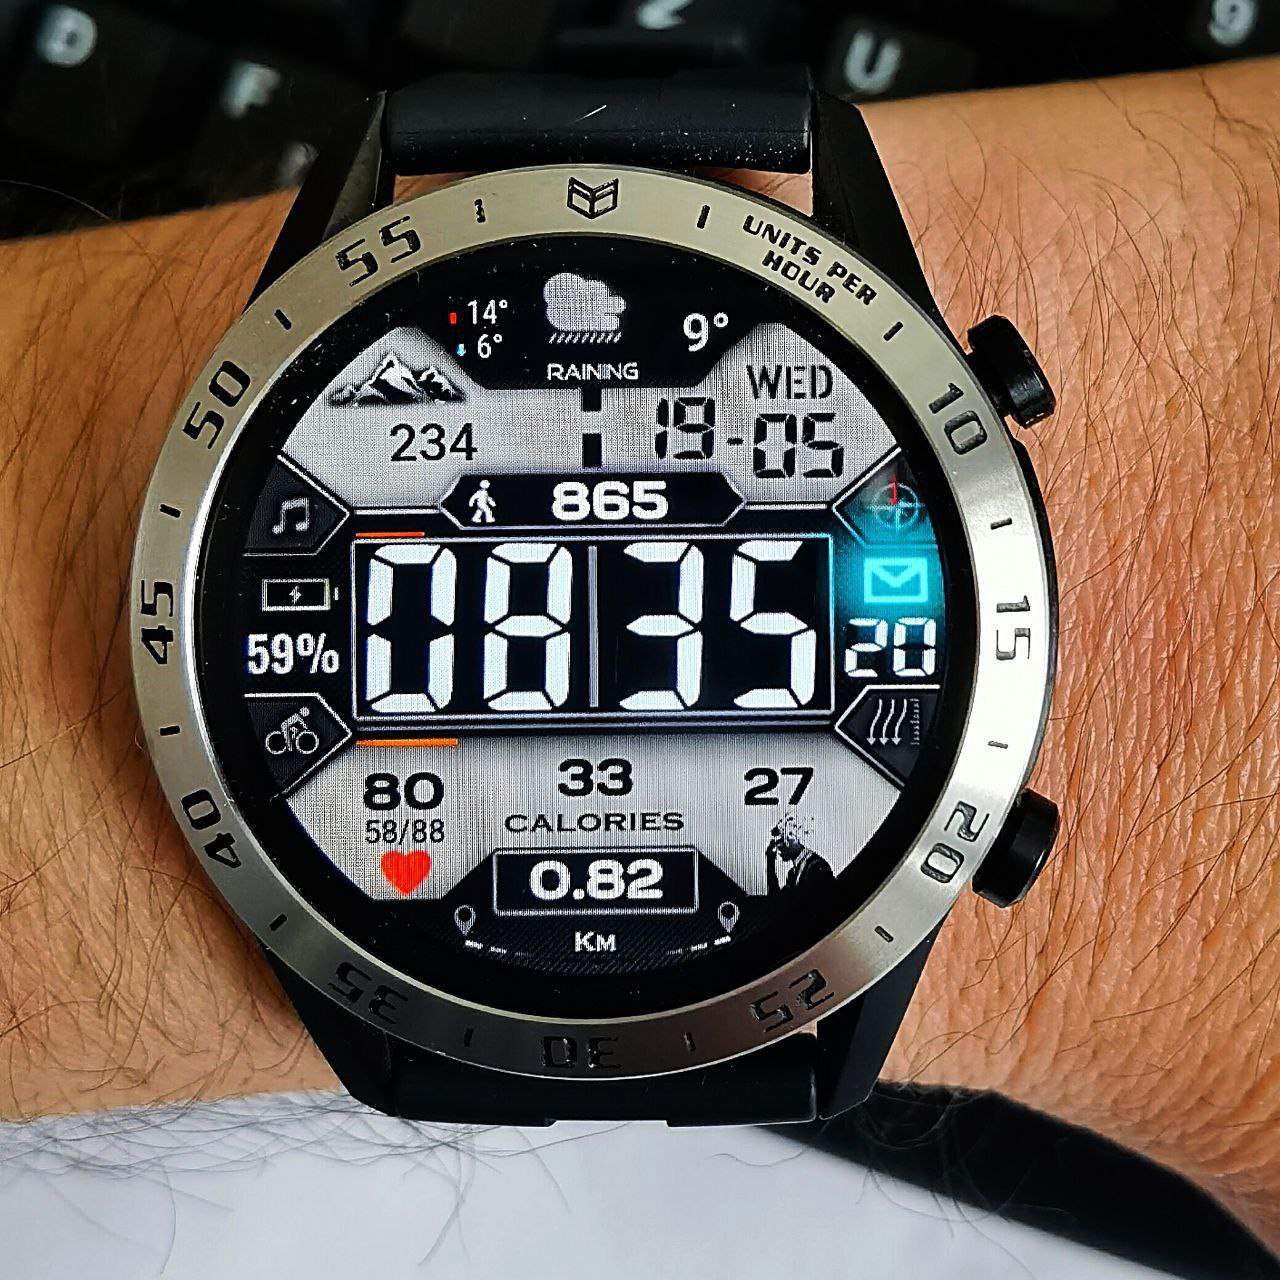 Samsung ported HQ digital LCD watch face theme